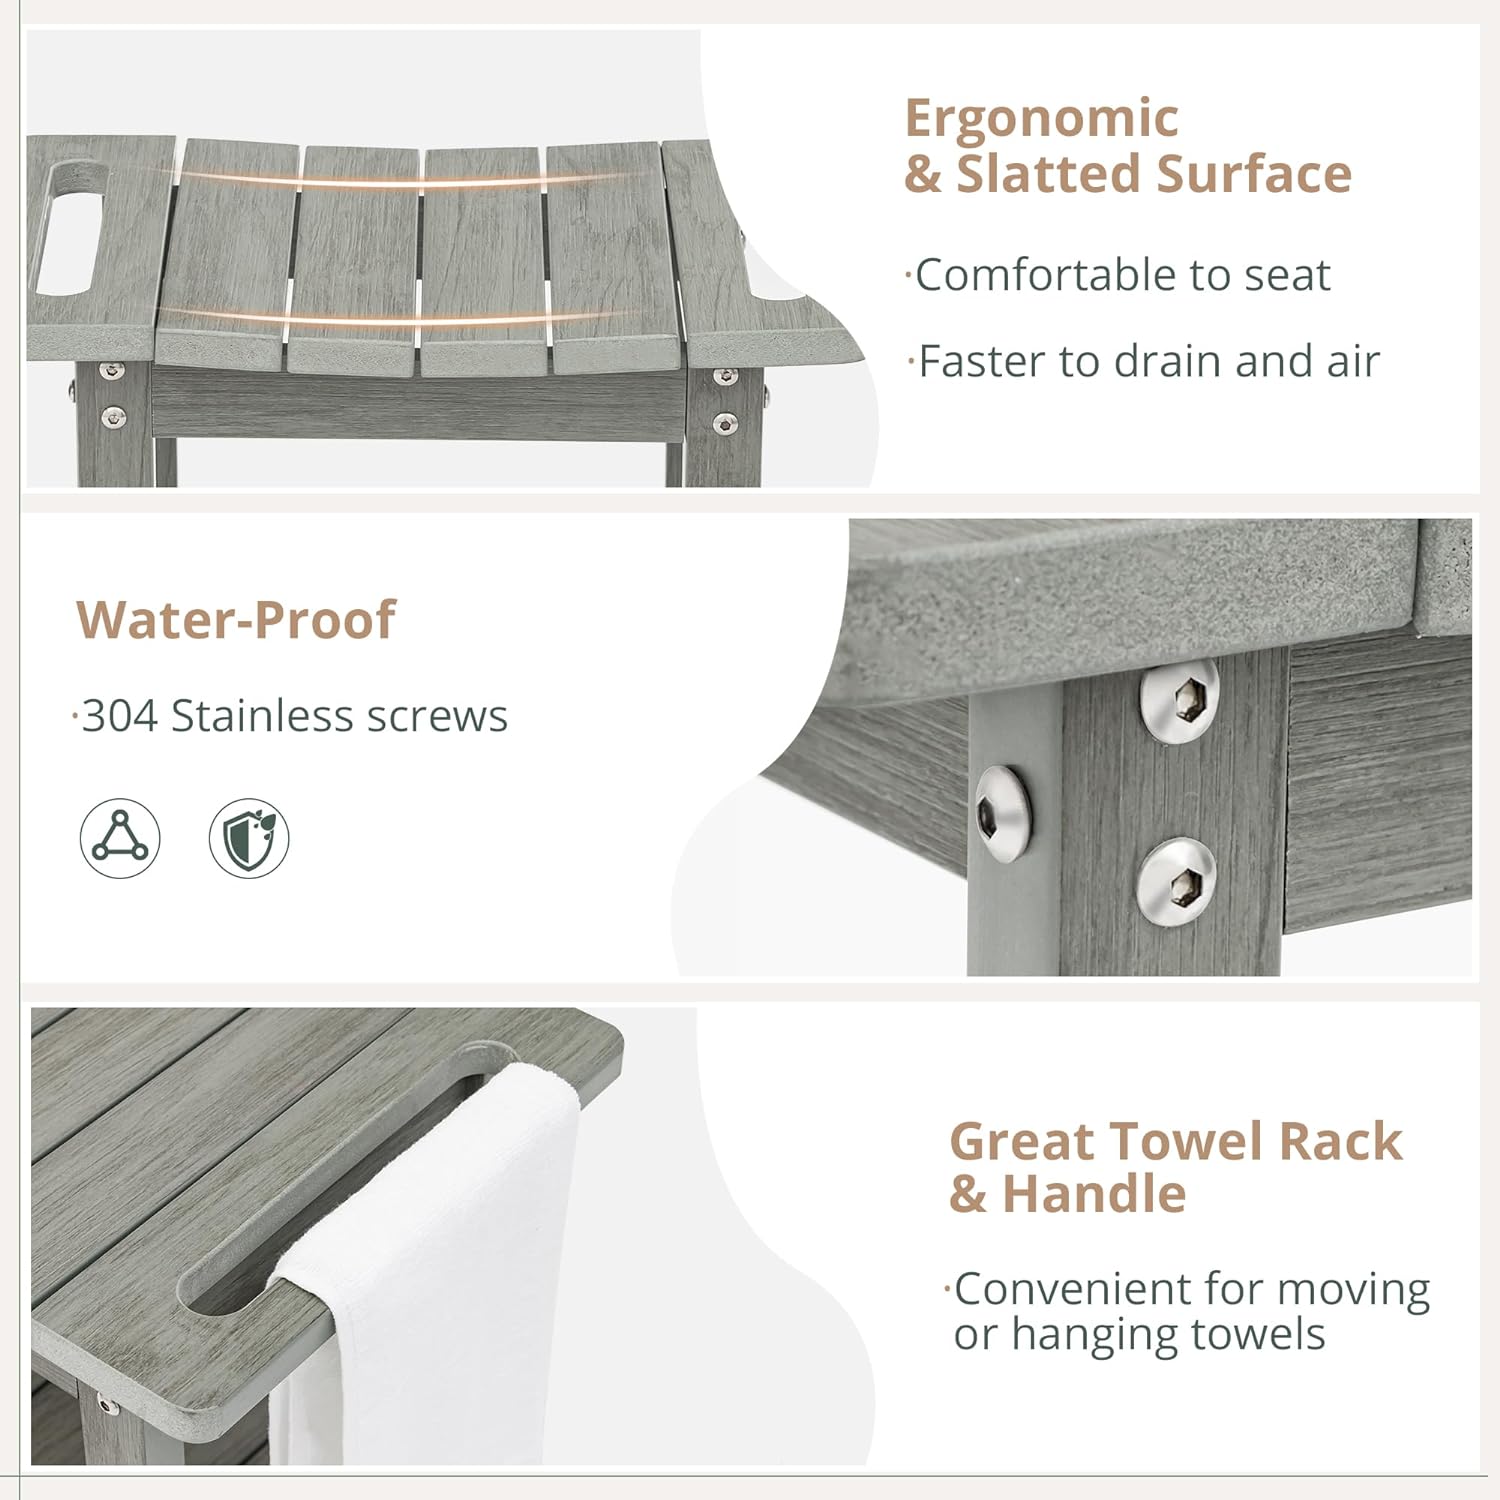 Shower Benches for Inside Shower, Gray Shower Stool for Shaving Legs with Shelf, Waterproof Shower Chair Seat